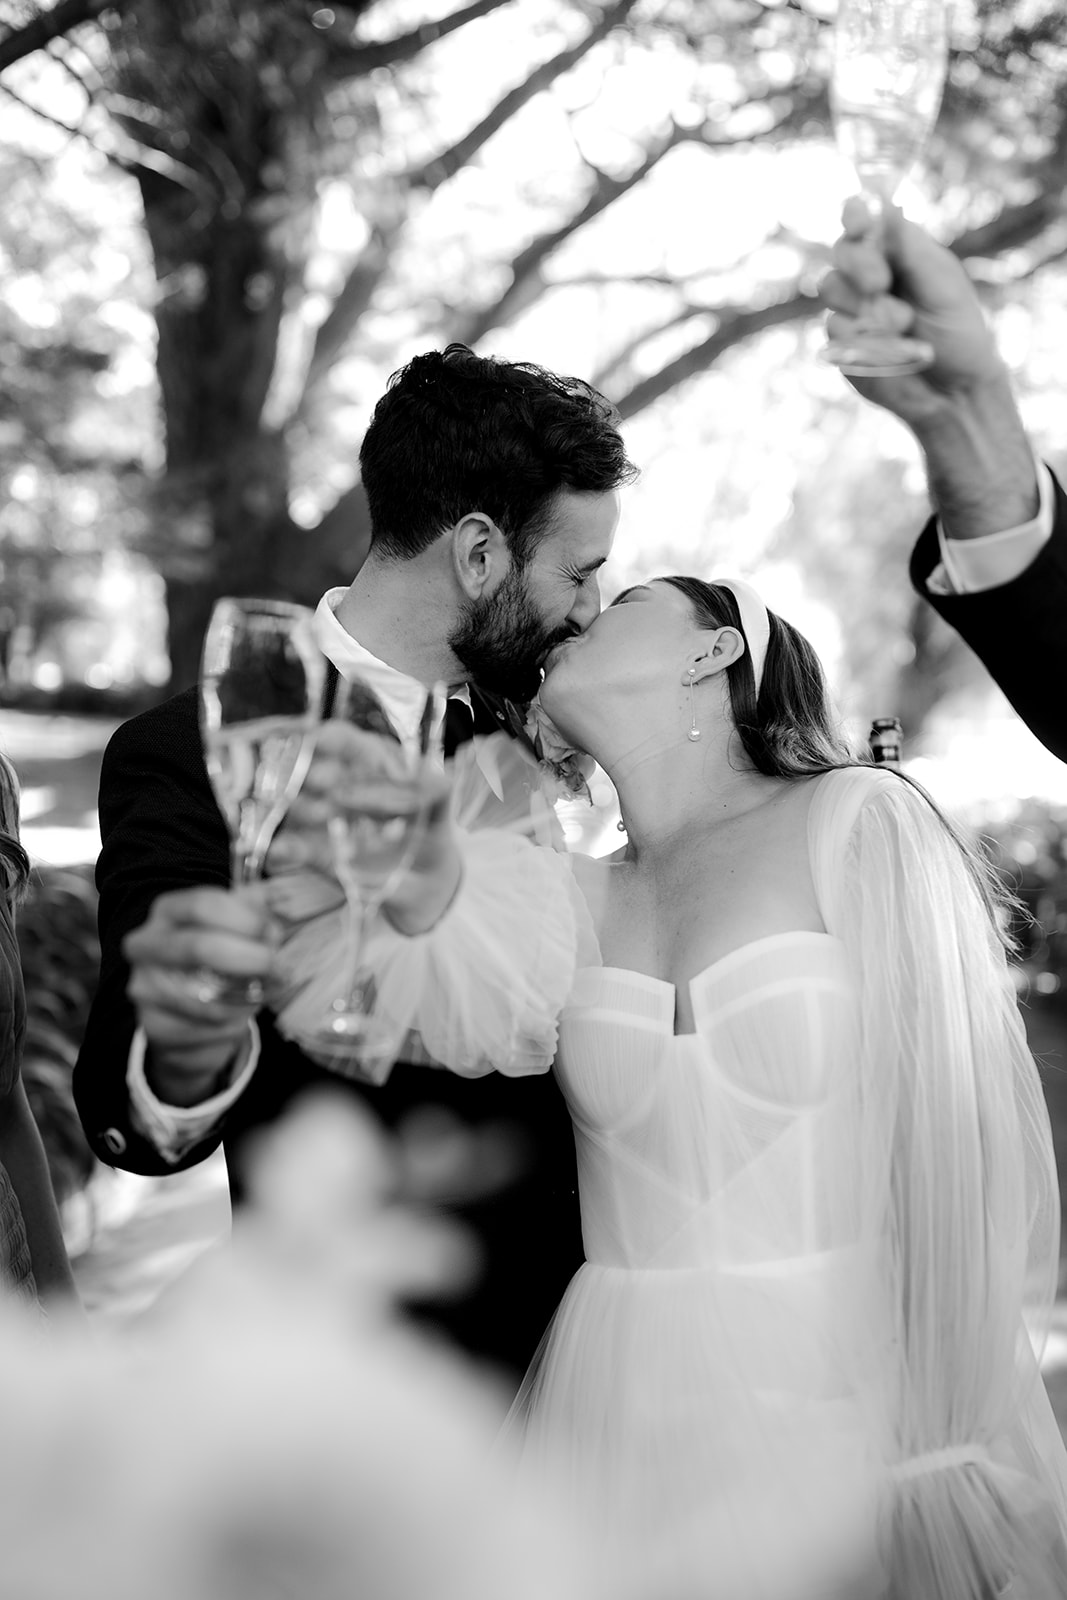 Bride & groom sipping champagne with their wedding party during their elegant country wedding.